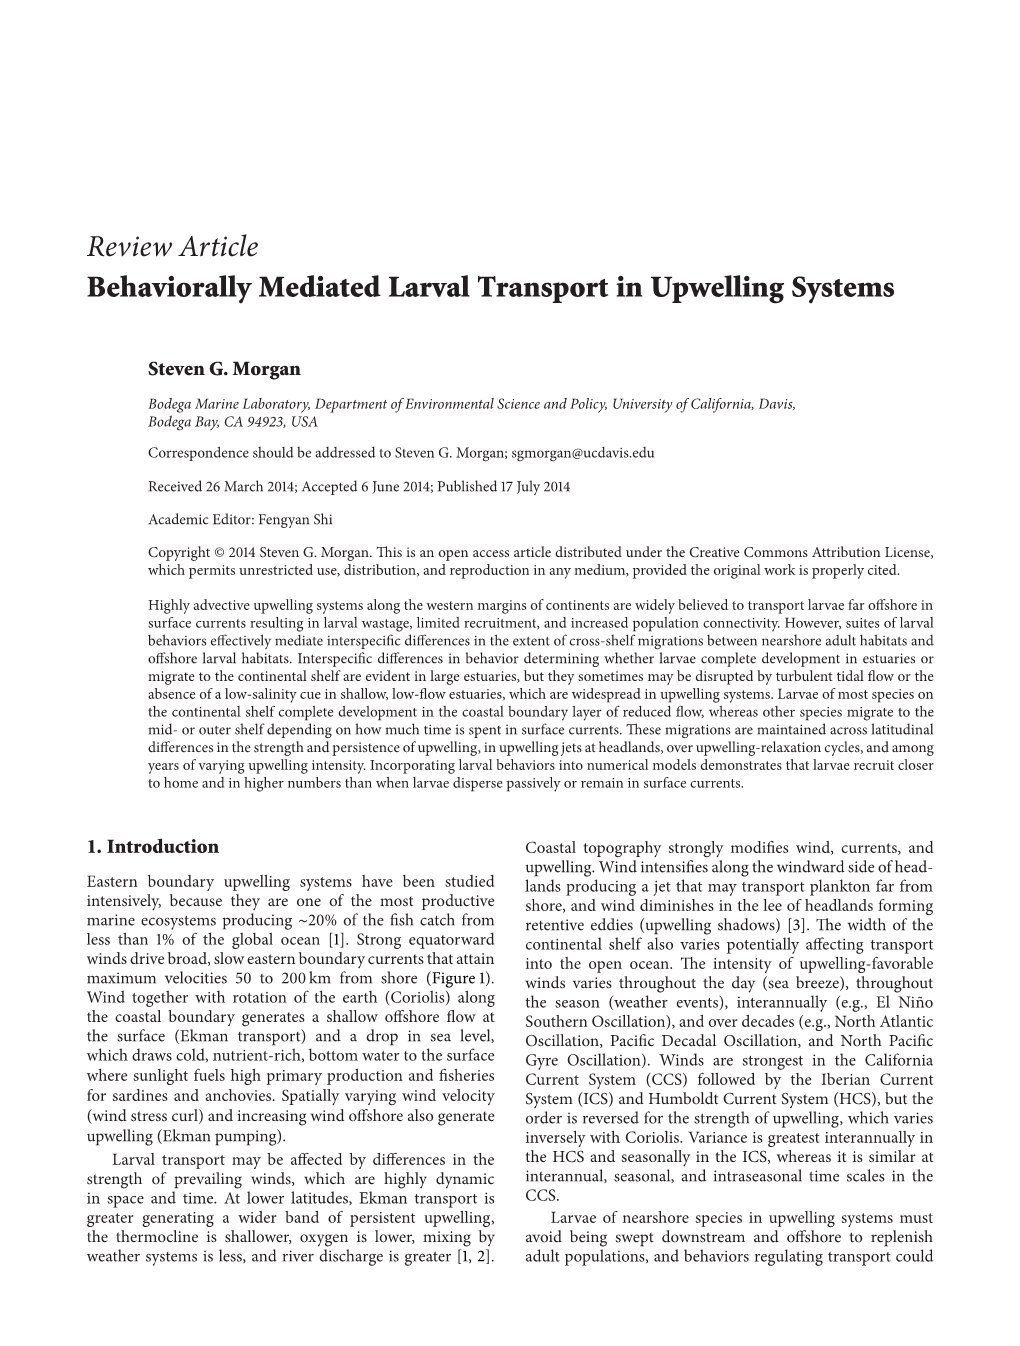 Review Article Behaviorally Mediated Larval Transport in Upwelling Systems